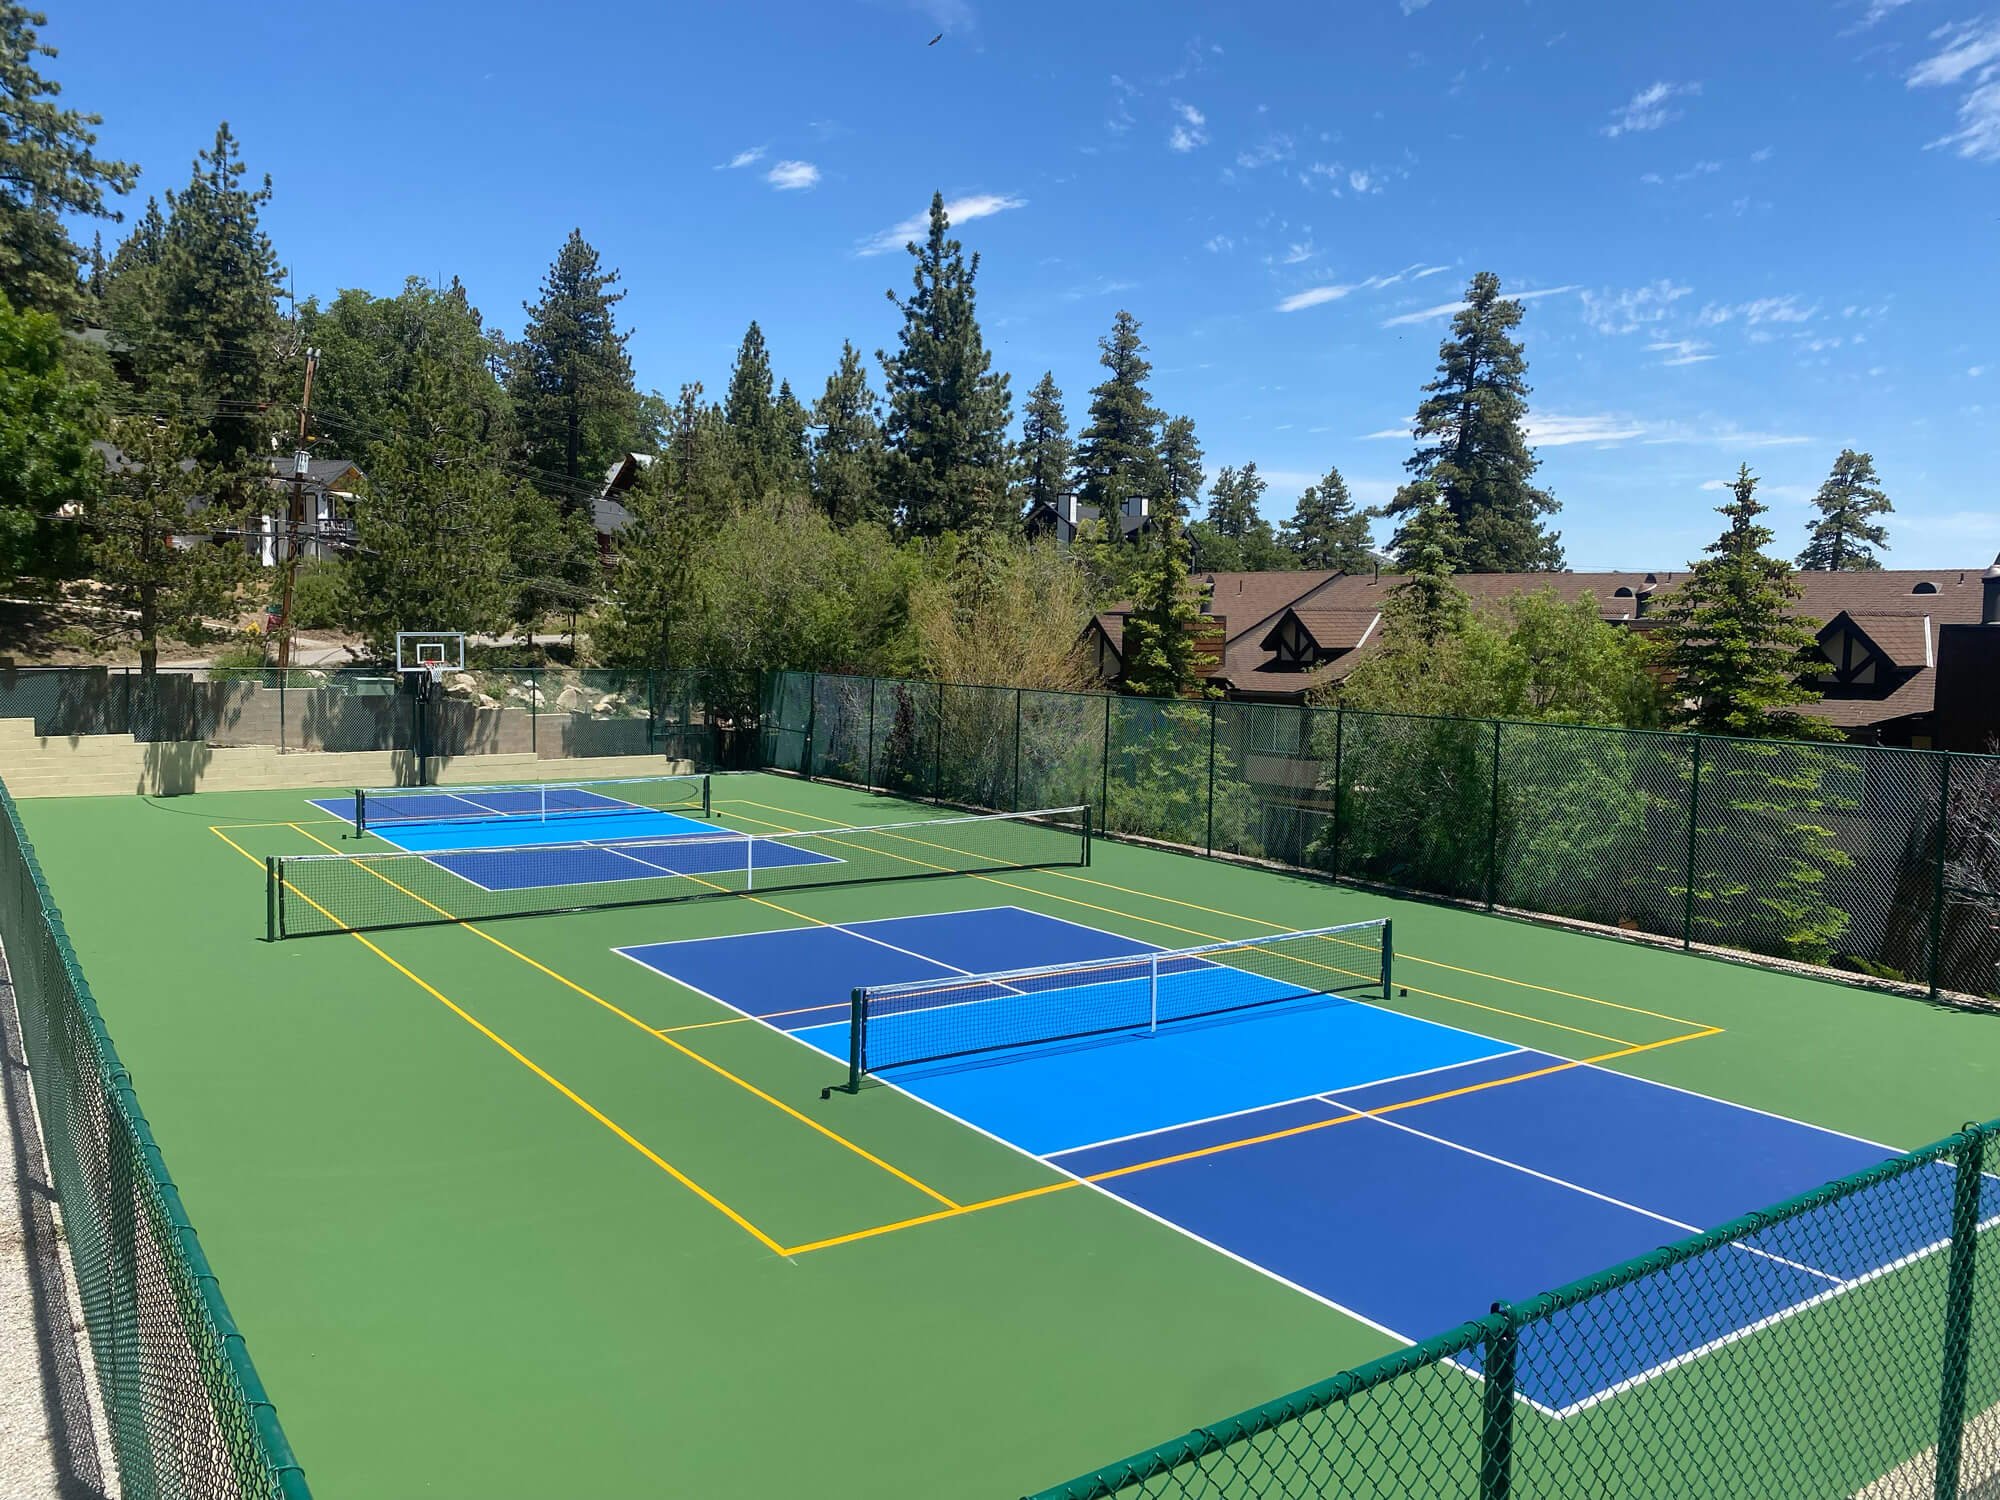  Completed combination court built by Palm Springs Tennis Courts in a mountain town near Palm Springs, California. 